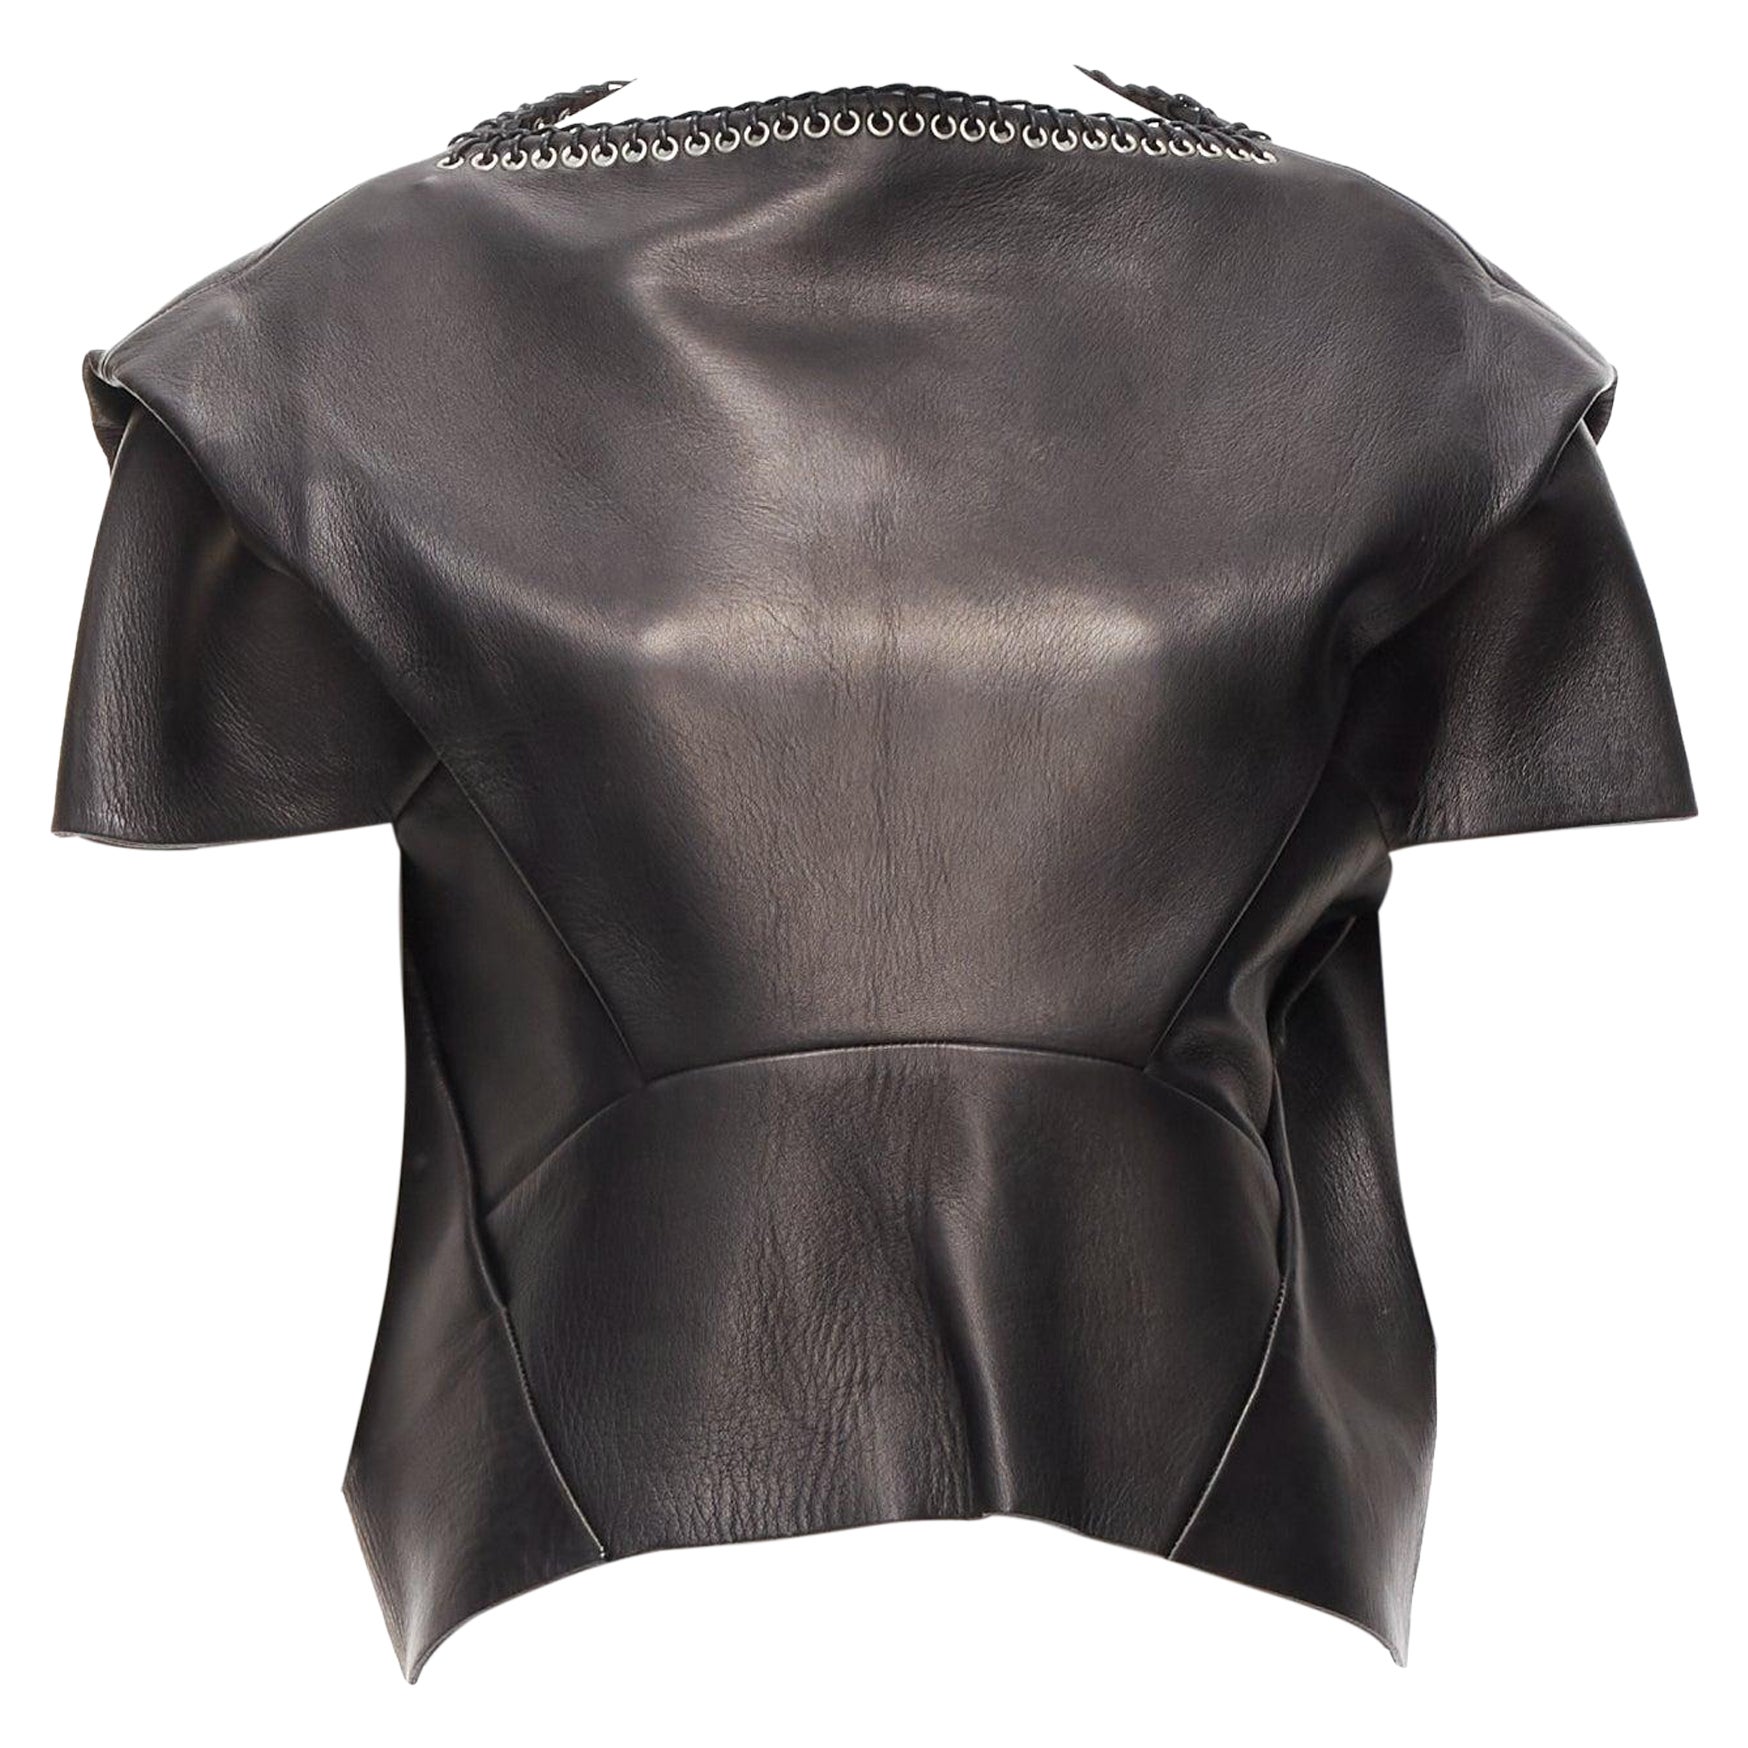 BALENCIAGA 2014 black lambskin leather grommet stud boxy cropped top FR36 S For Sale